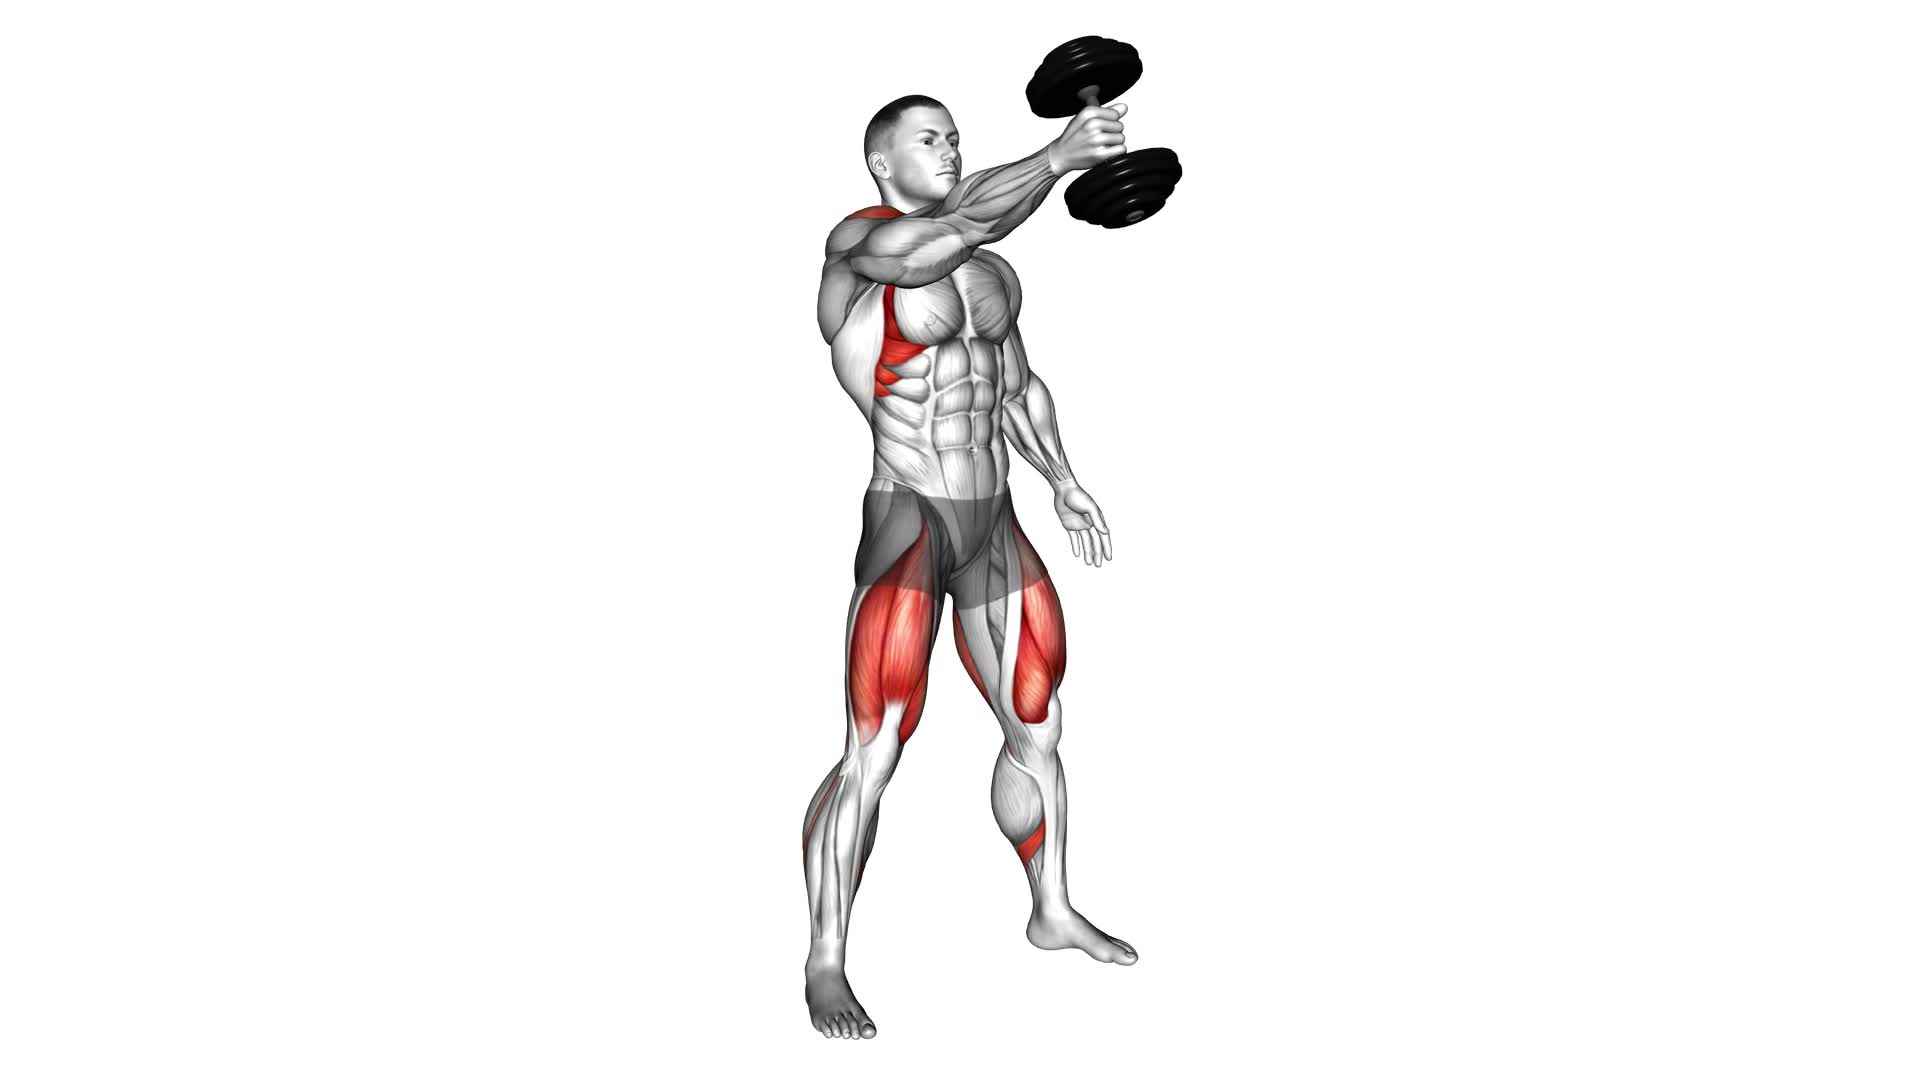 Dumbbell One Arm Swing - Video Exercise Guide & Tips